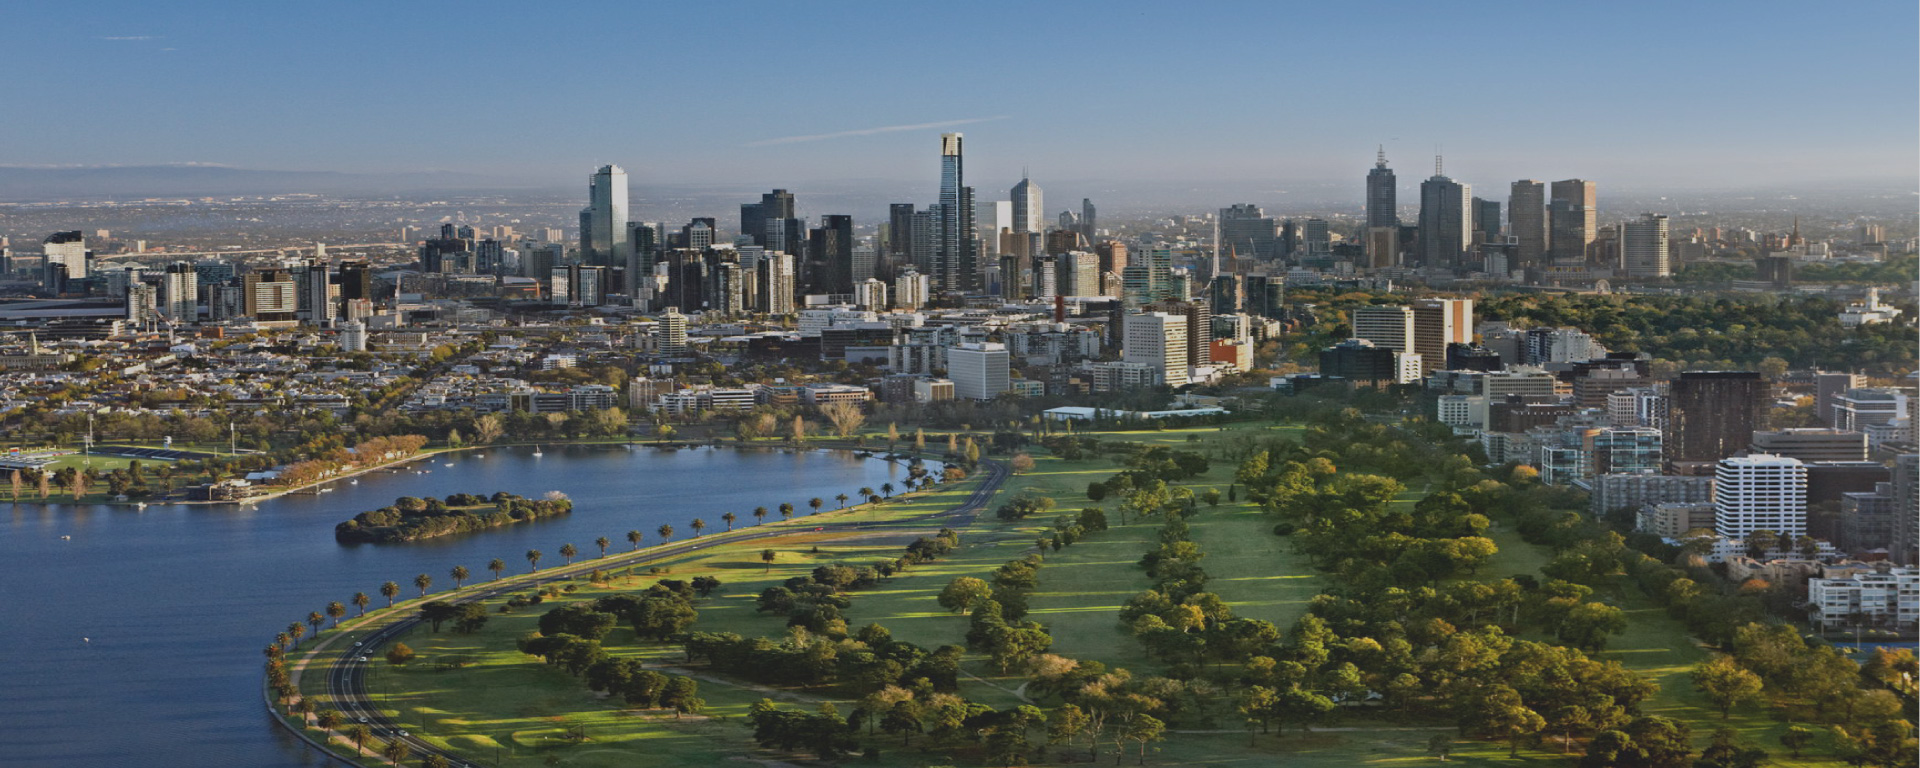 Are you considering a property development in Melbourne? Chat with us today!